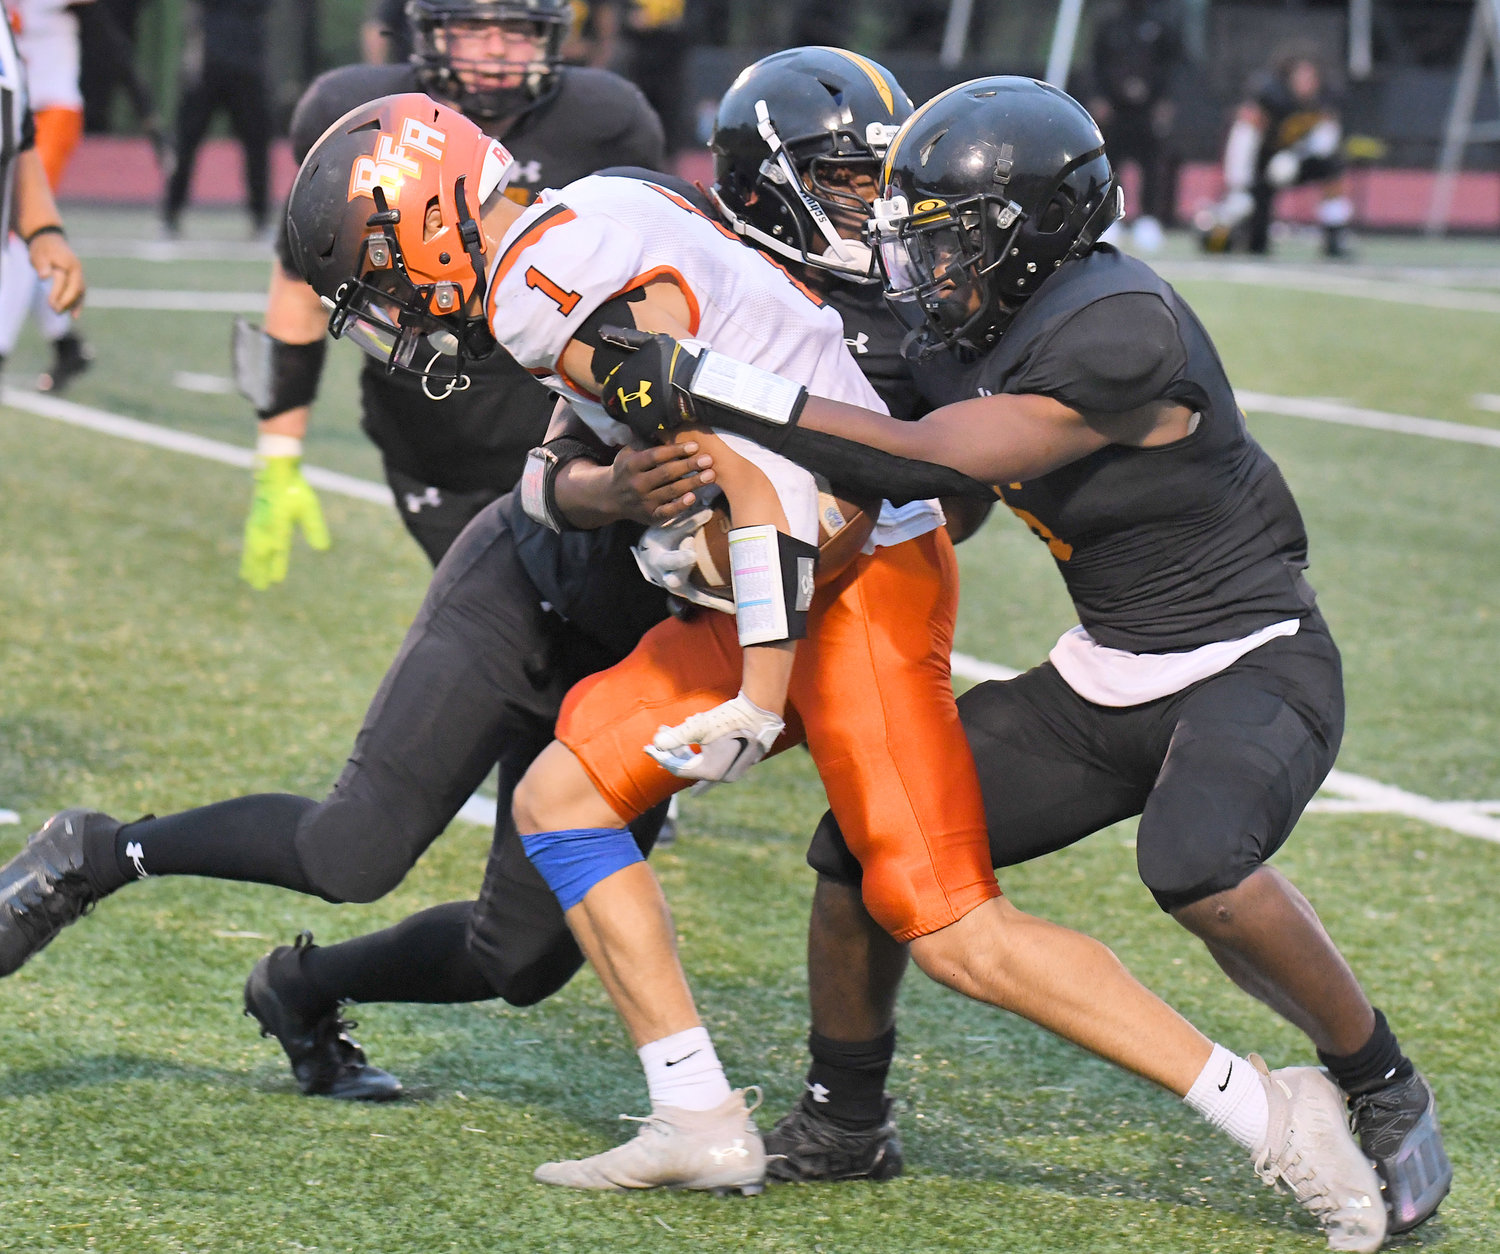 Rome Free Academy senior receiver Jack Lawless gets wrapped up by Henninger defenders Friday night. Lawless was busy in the team's 21-20 win, making 10 catches for 144 yards and a score.